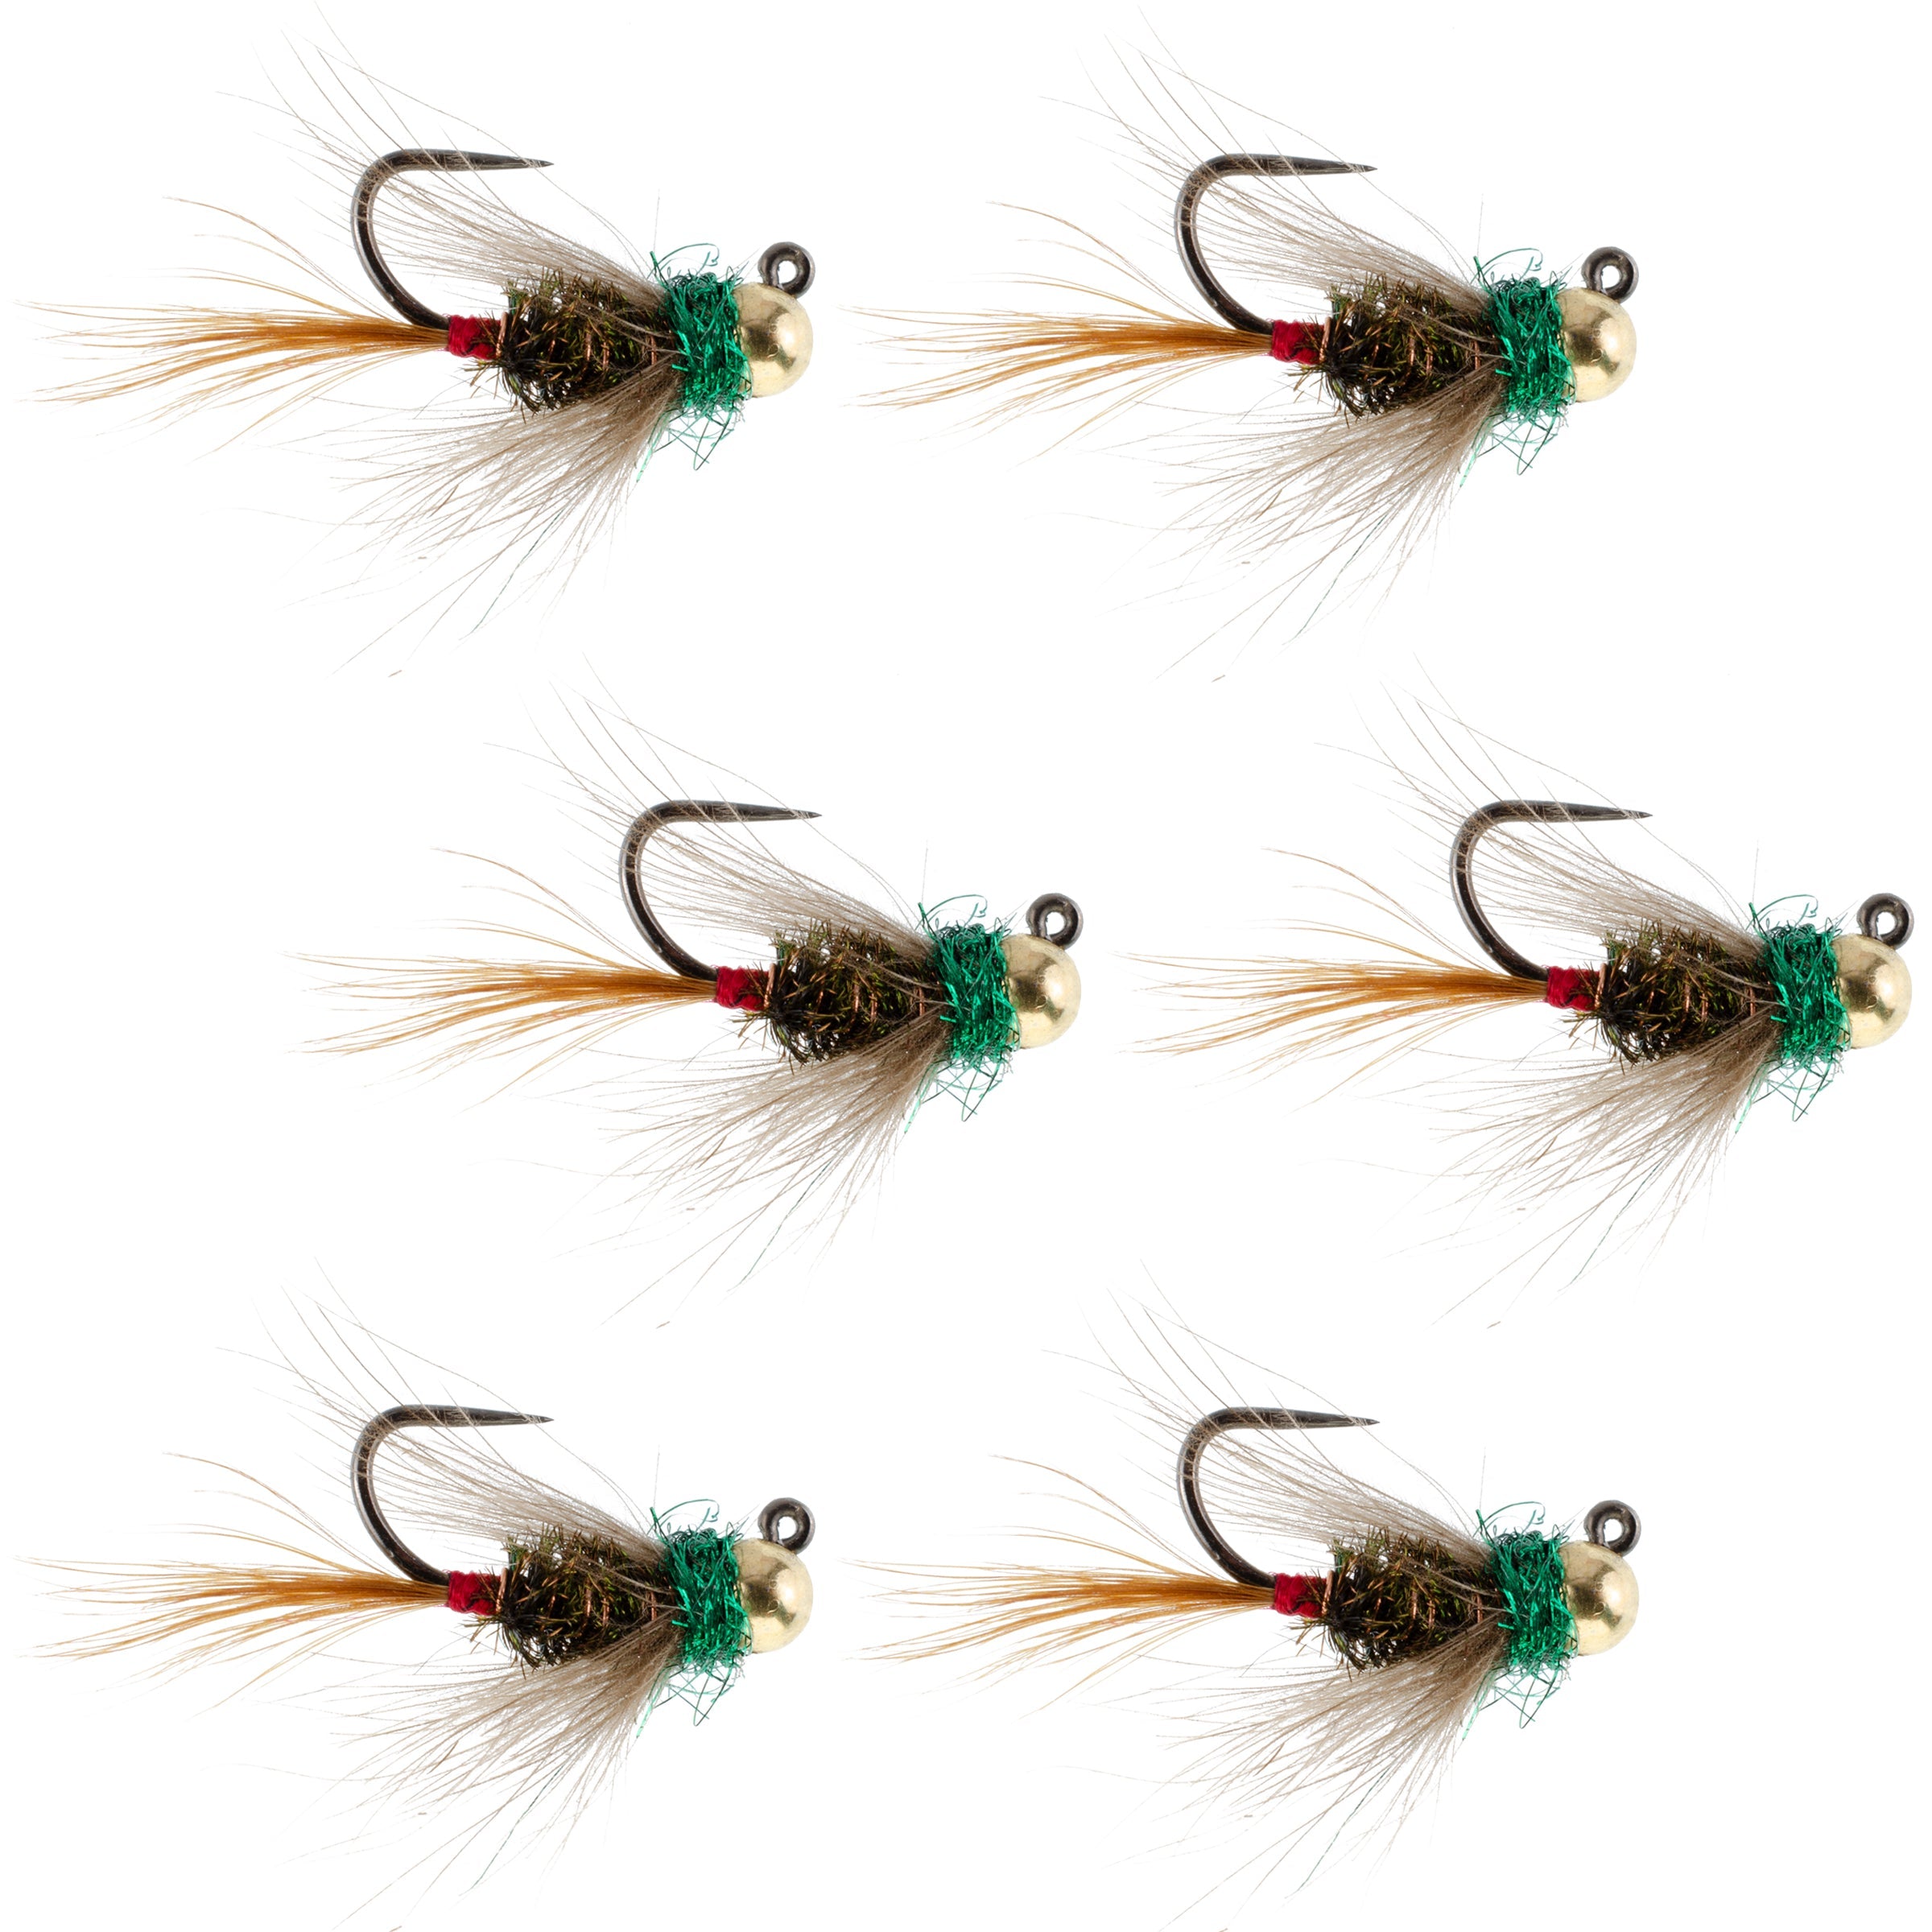 Tungsten Bead Tactical CDC Frenchie Czech Nymph Euro Nymphing Fly - 6